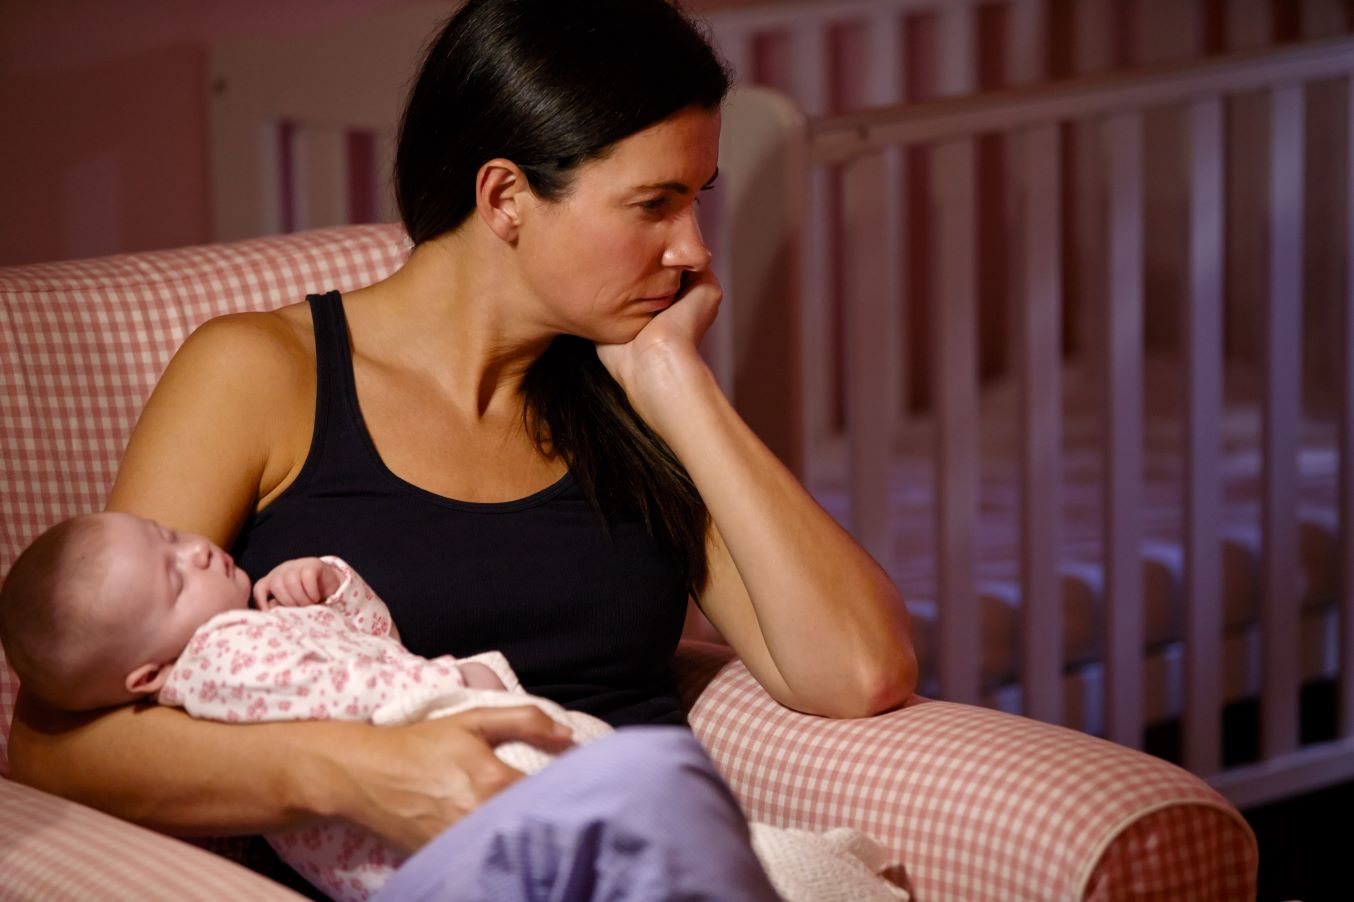 A woman cradles a baby but is frowning and looks distracted.